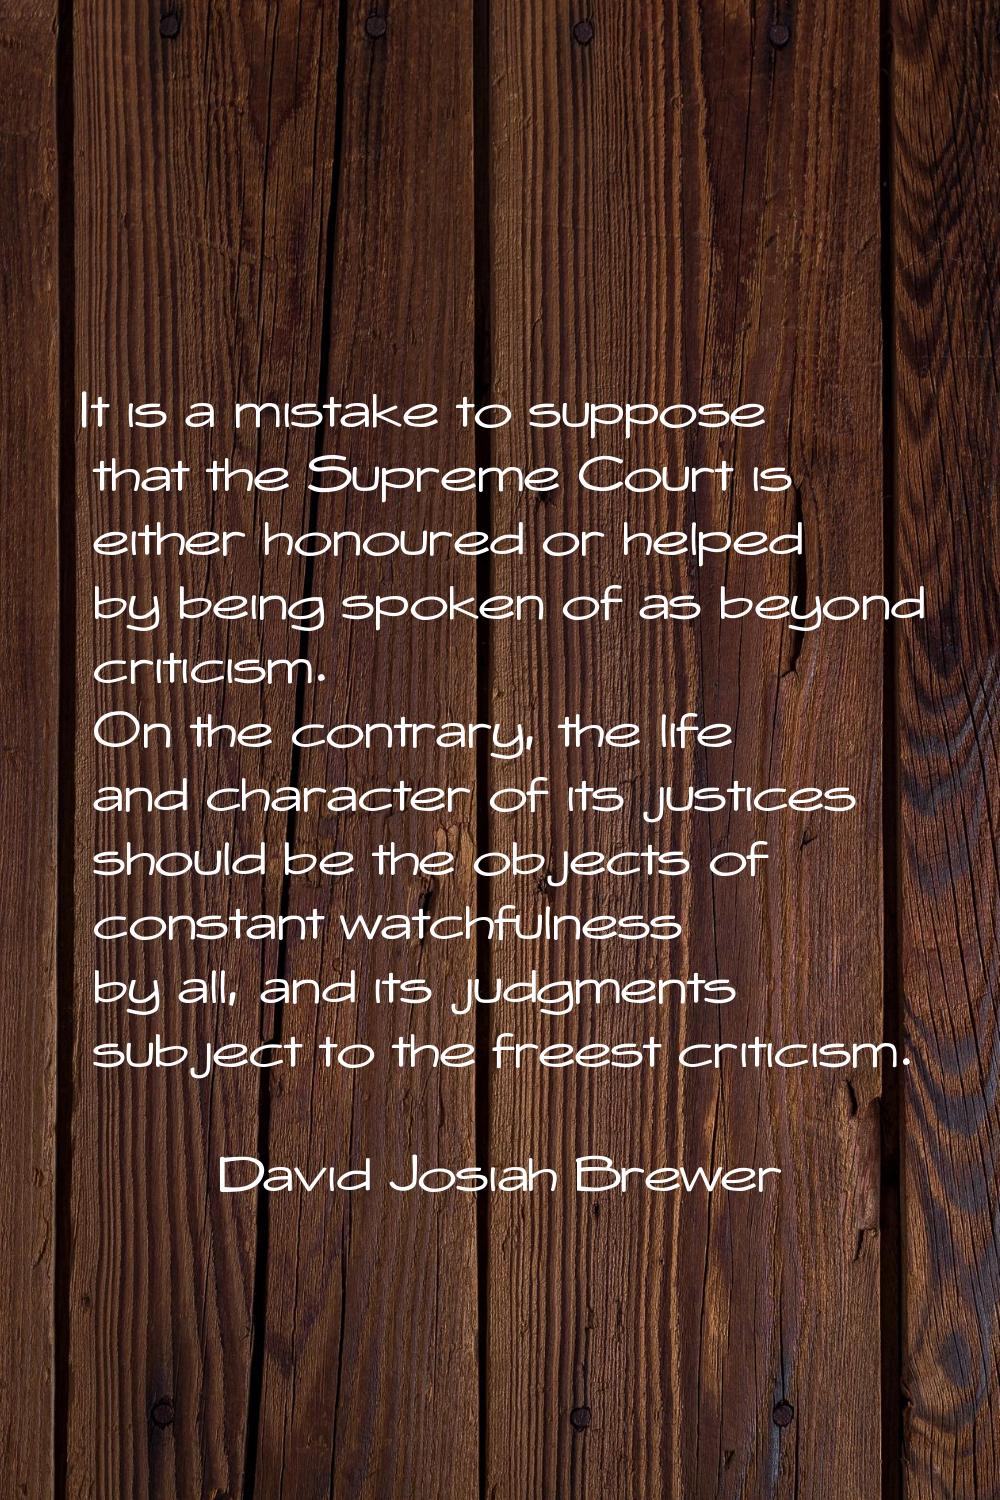 It is a mistake to suppose that the Supreme Court is either honoured or helped by being spoken of a